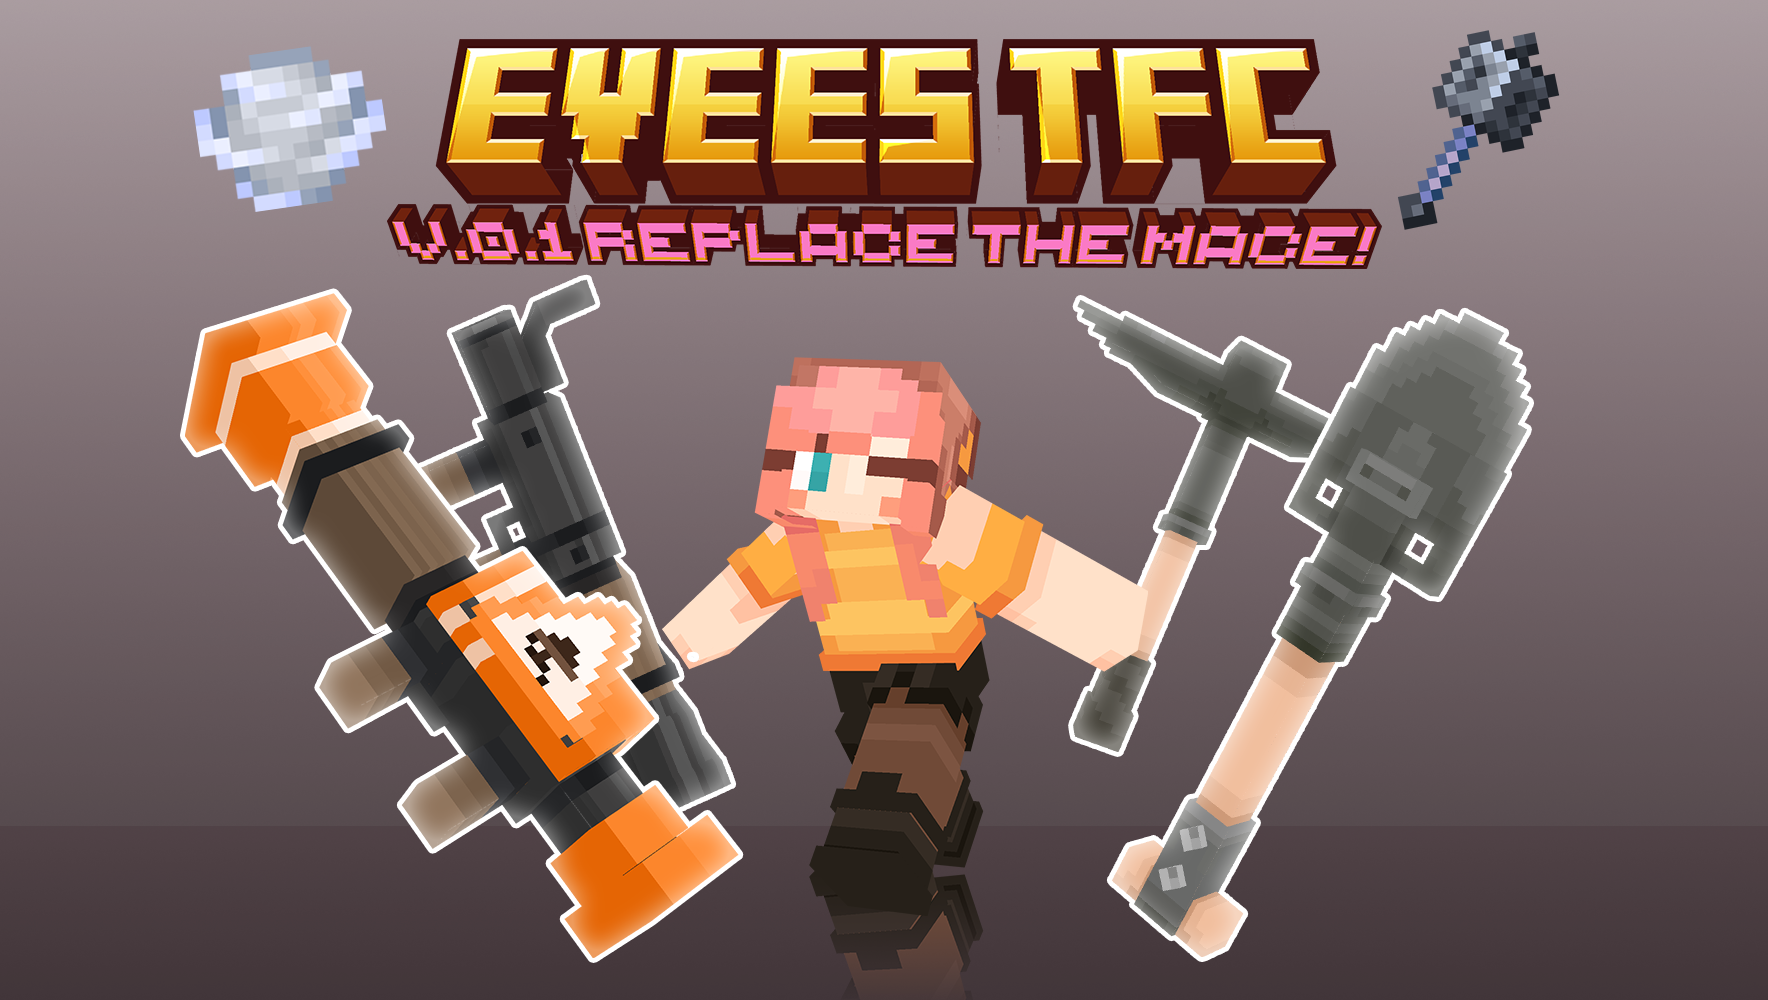 Get yourself some TF2 into your Minecraft vanilla experience by replacing the Mace and the Windcharge with either the Marketgardener & Escapeplan or Rocketjumper and Rocketlauncher!